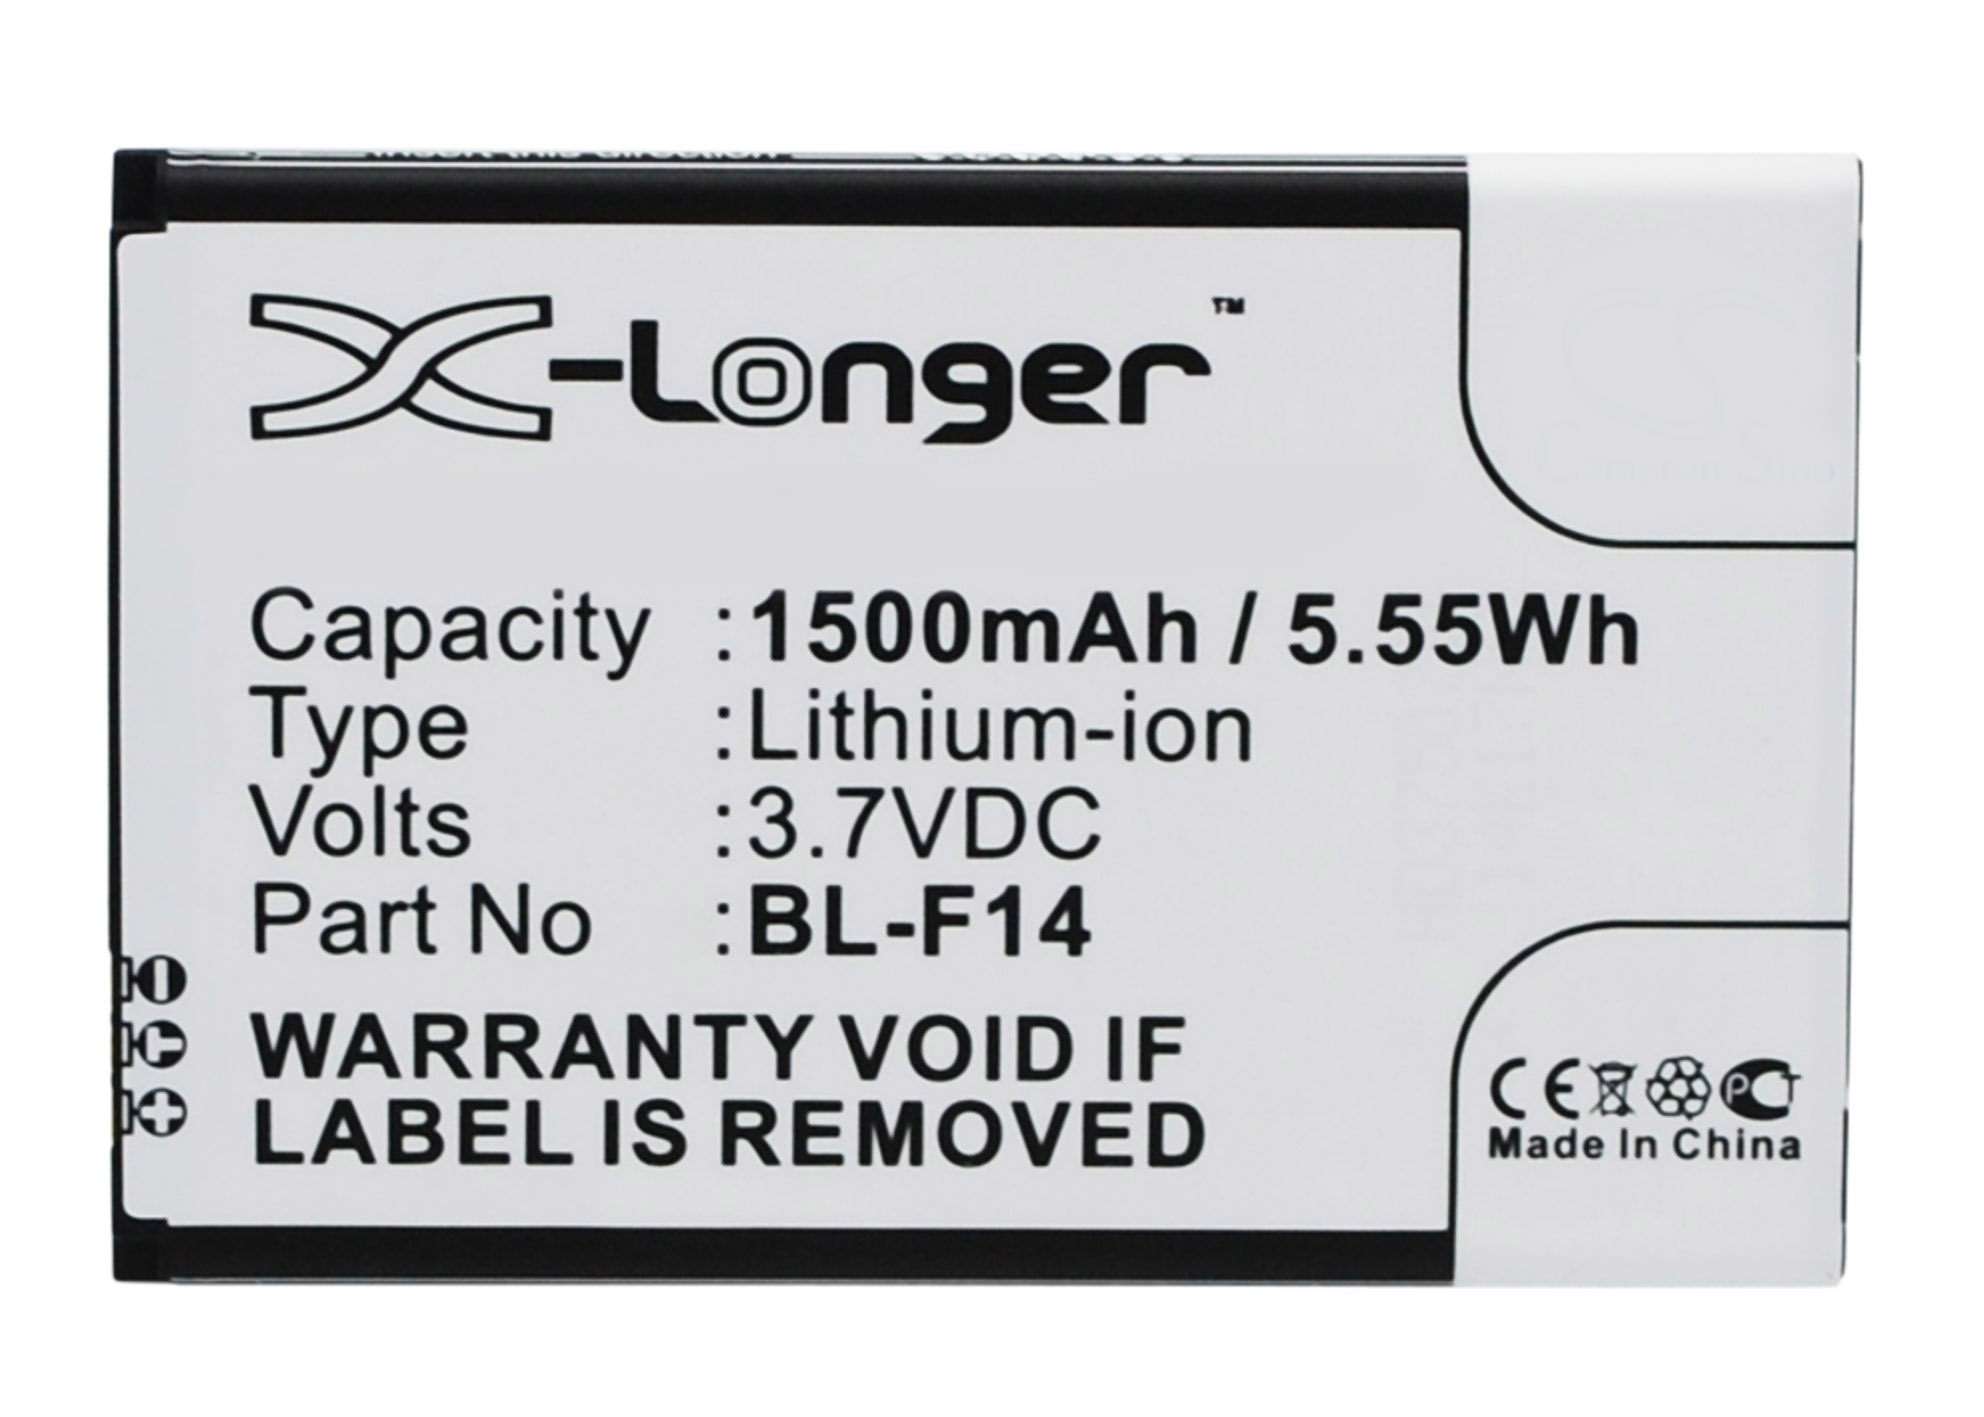 Synergy Digital Battery Compatible With PHICOMM BL-F14 Cellphone Battery - (Li-Ion, 3.7V, 1500 mAh / 5.55Wh)